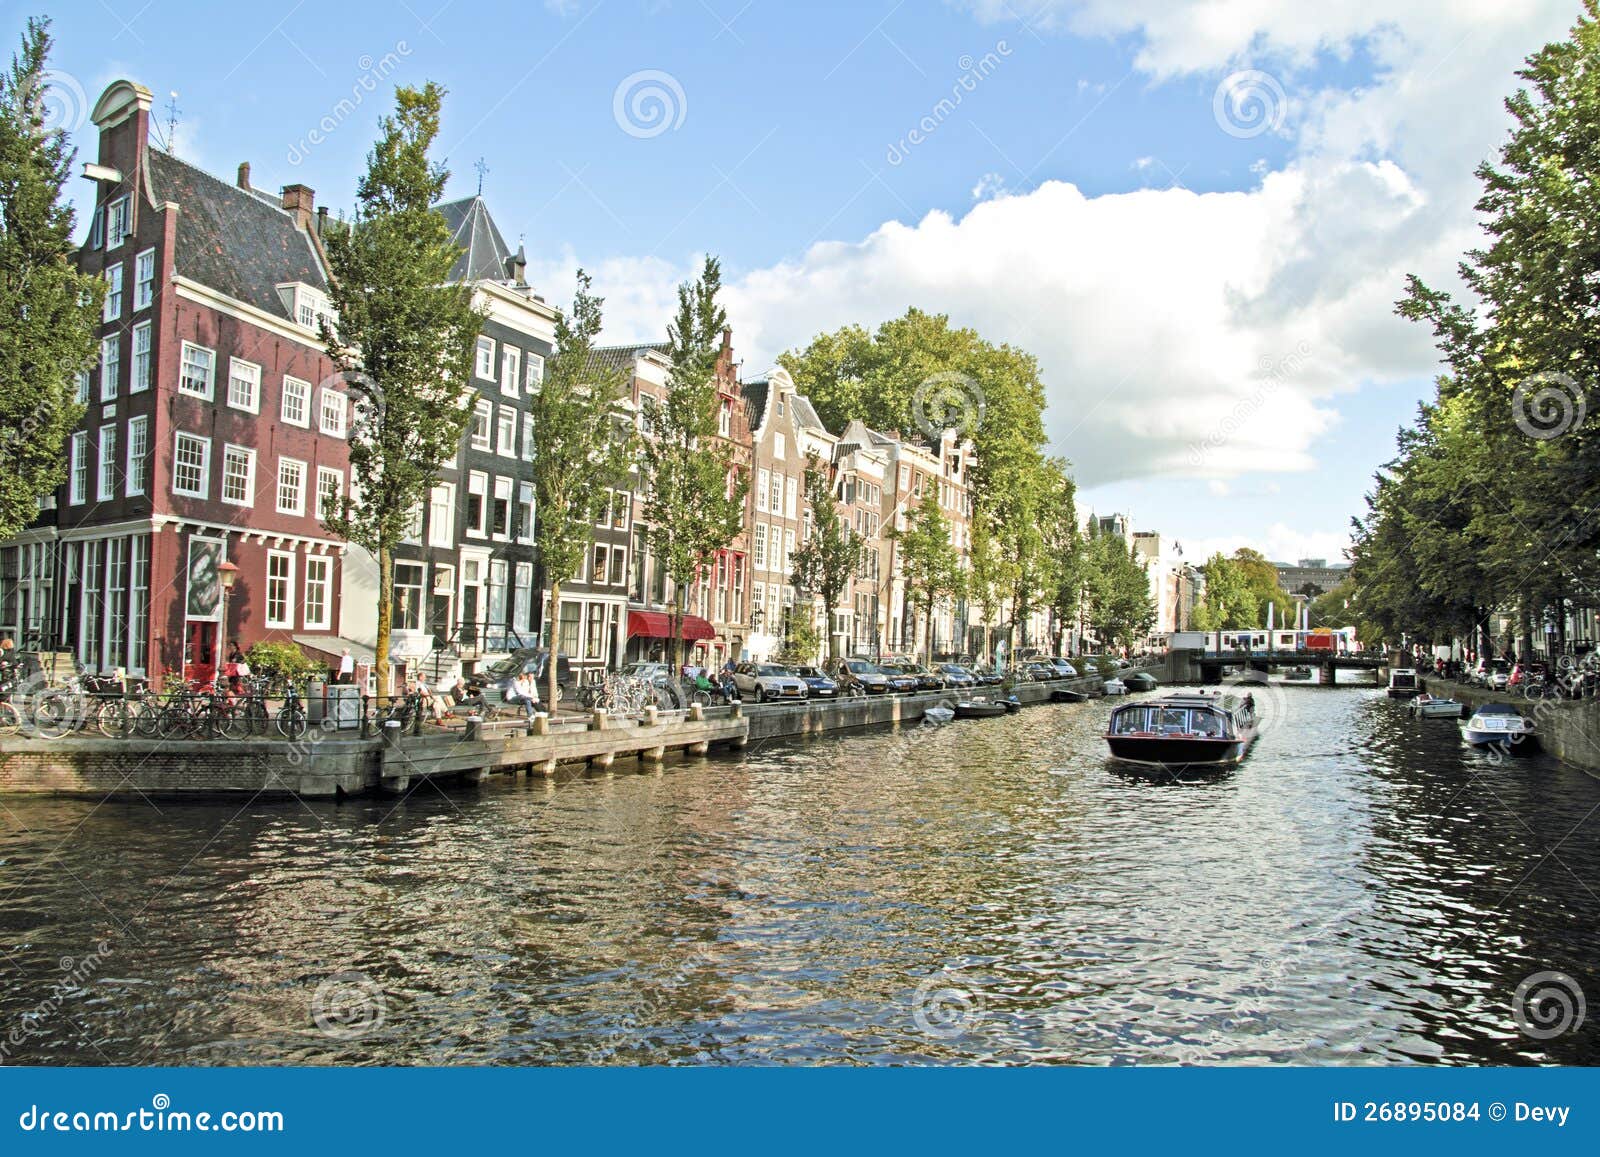 Classical City Scenic From Amsterdam Netherlands Stock